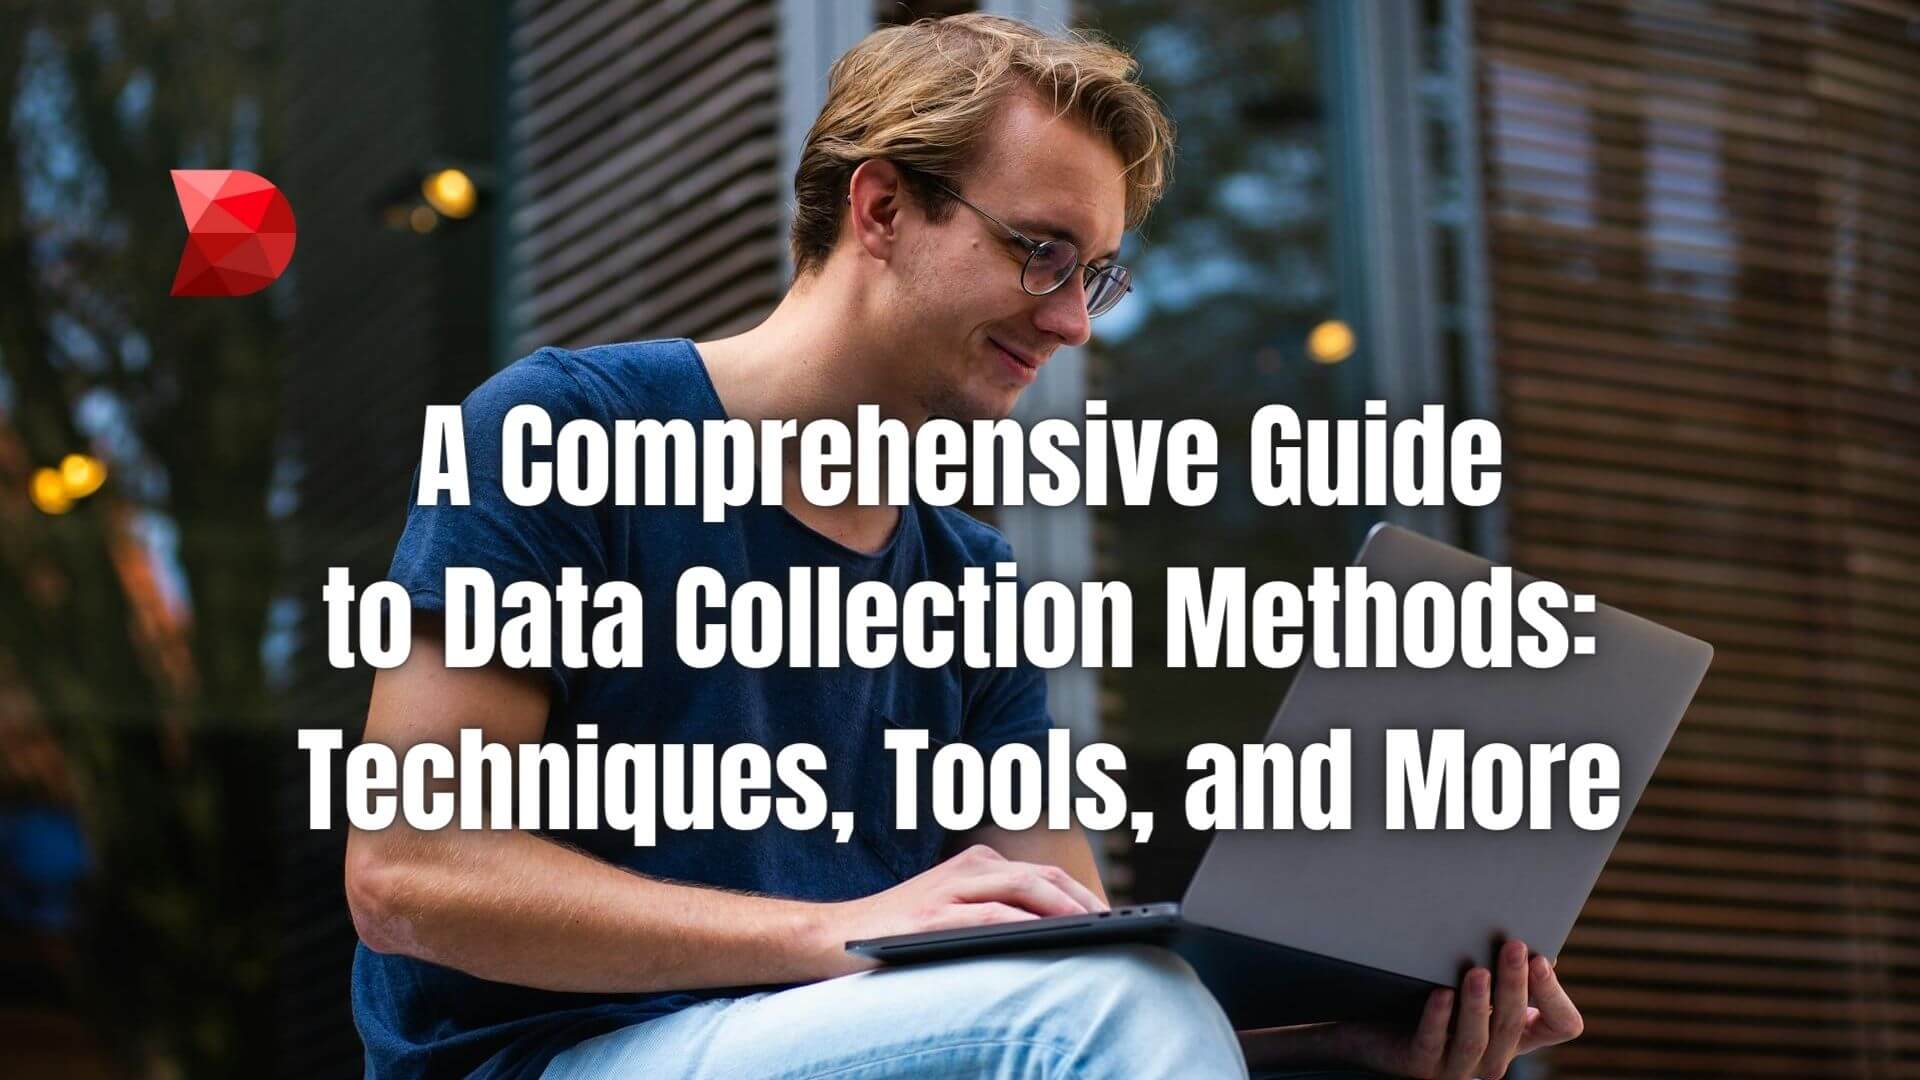 Unlock the secrets of effective data collection methods! Click here to discover techniques, tools, and strategies in our comprehensive guide.